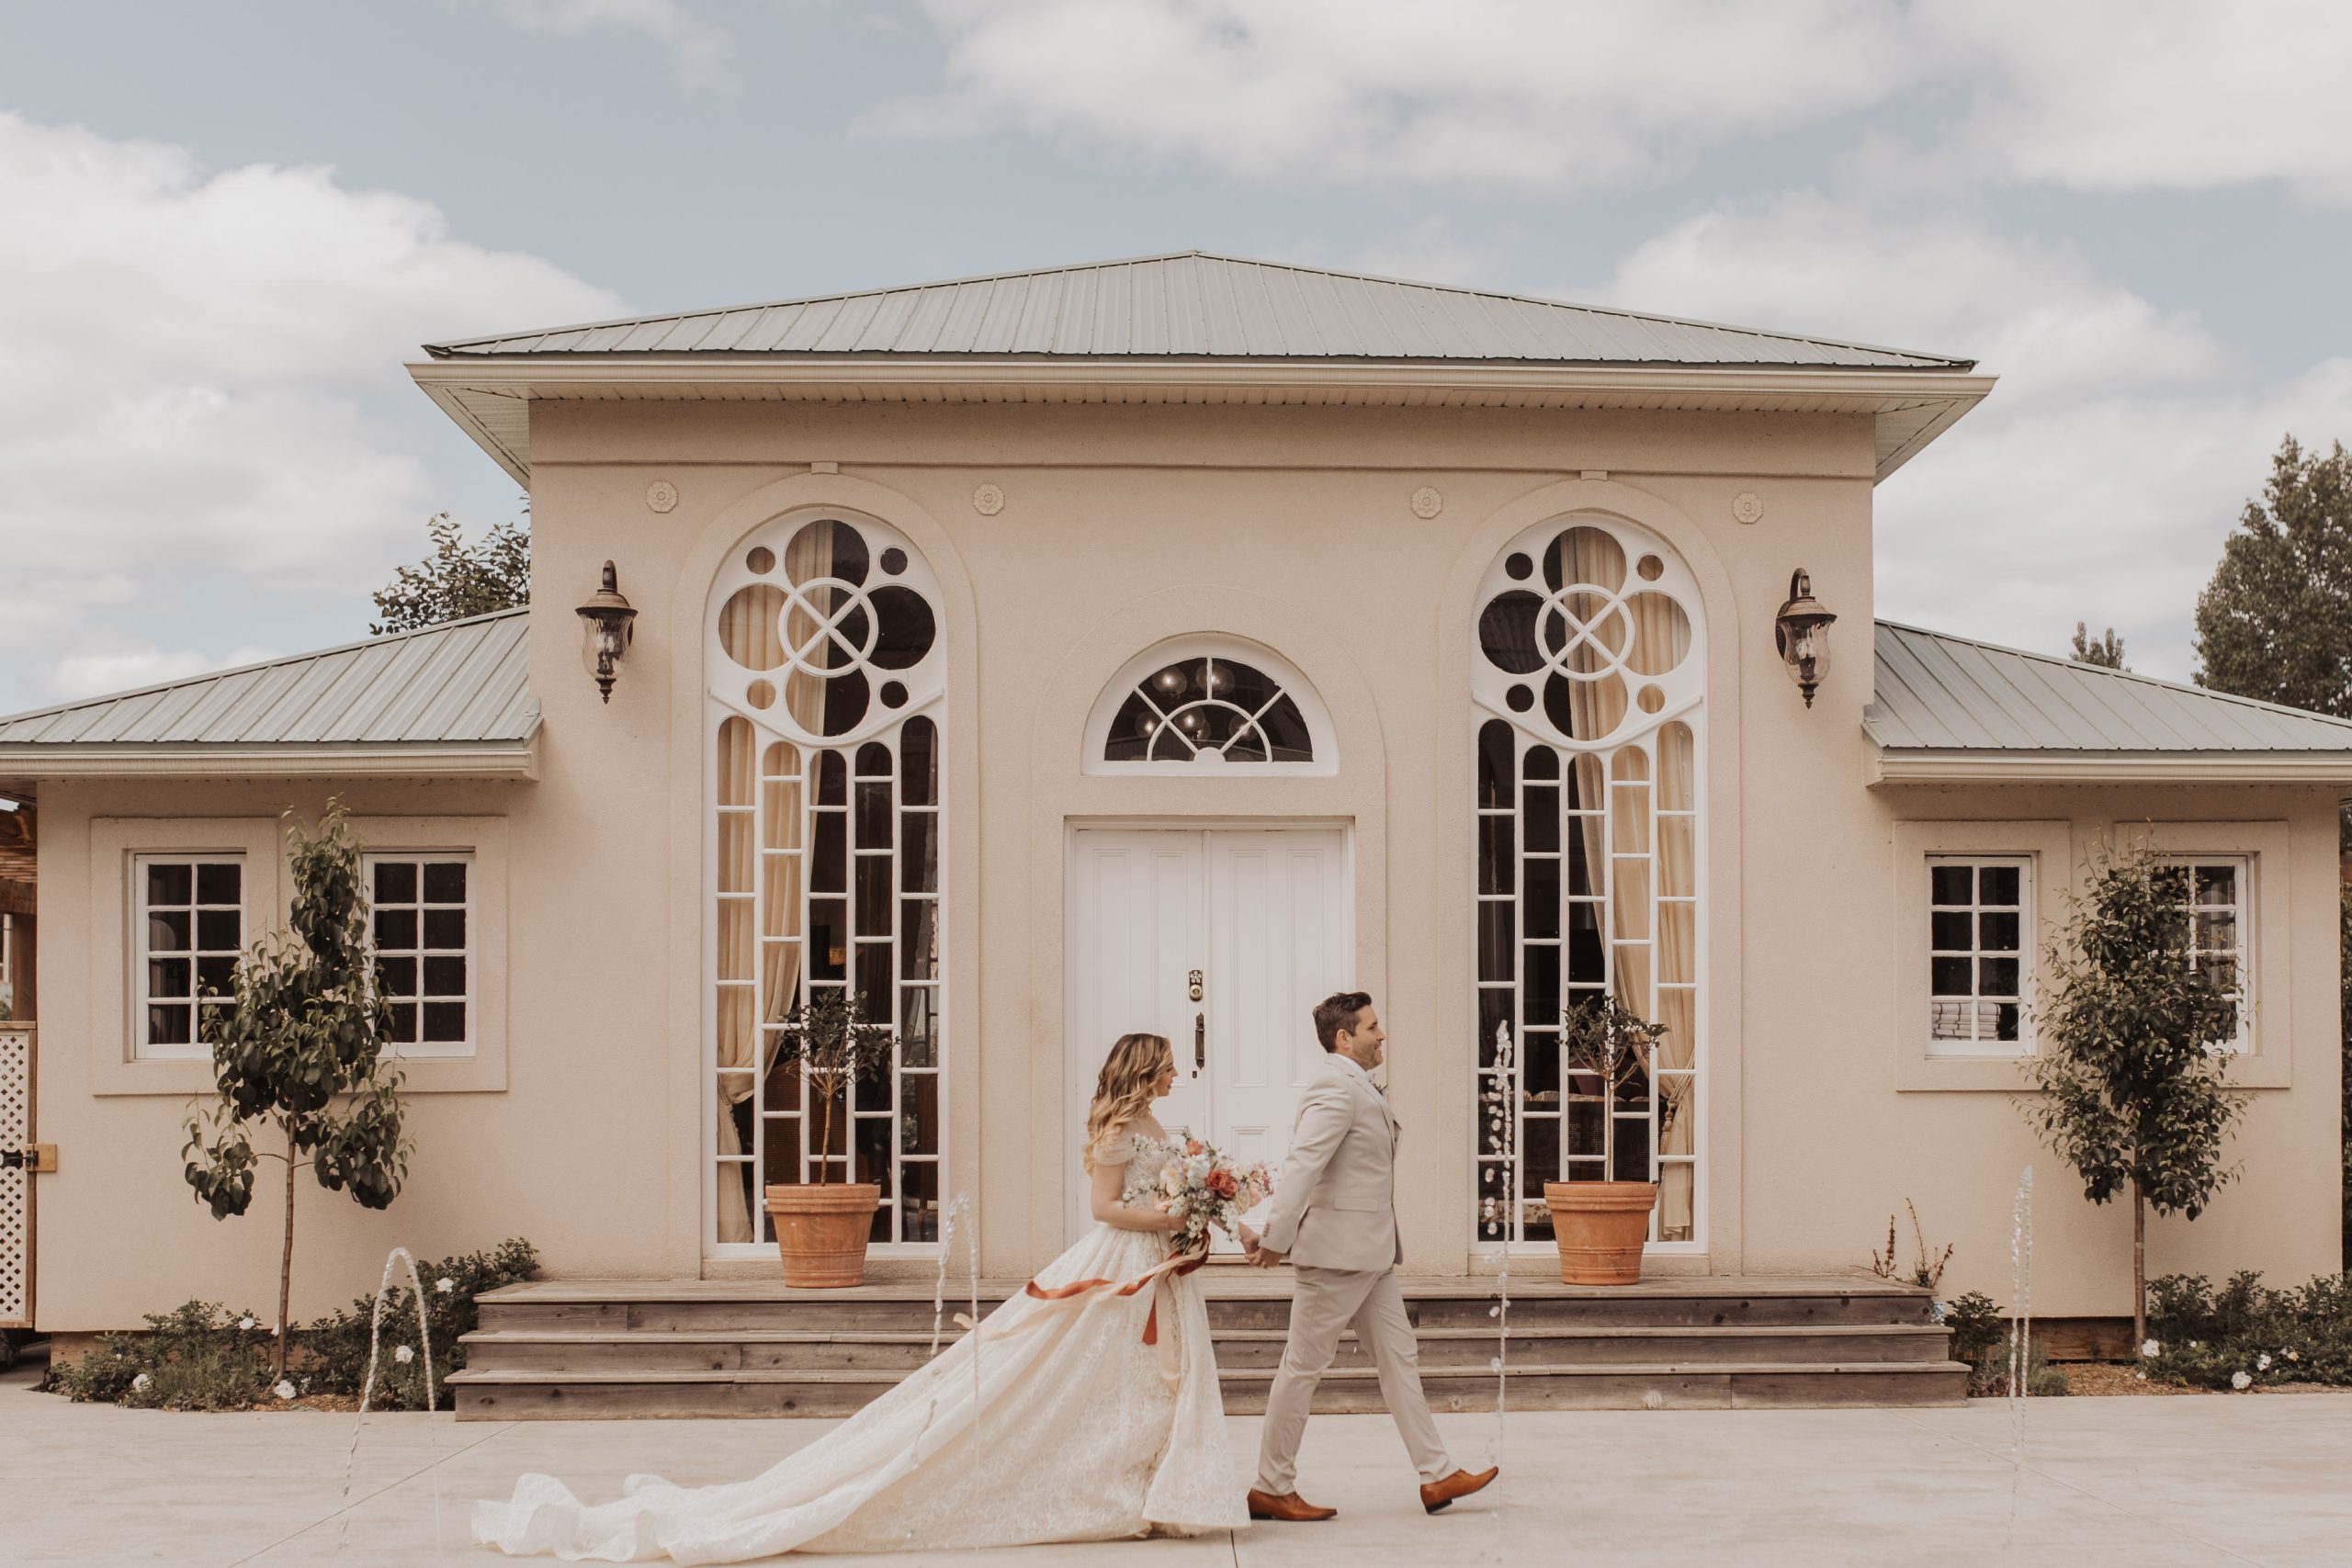 Bride and groom walking in front of French-style pavilion at Manoir Chamberland | Kerstin Hahn Photography | Flourish & Knot